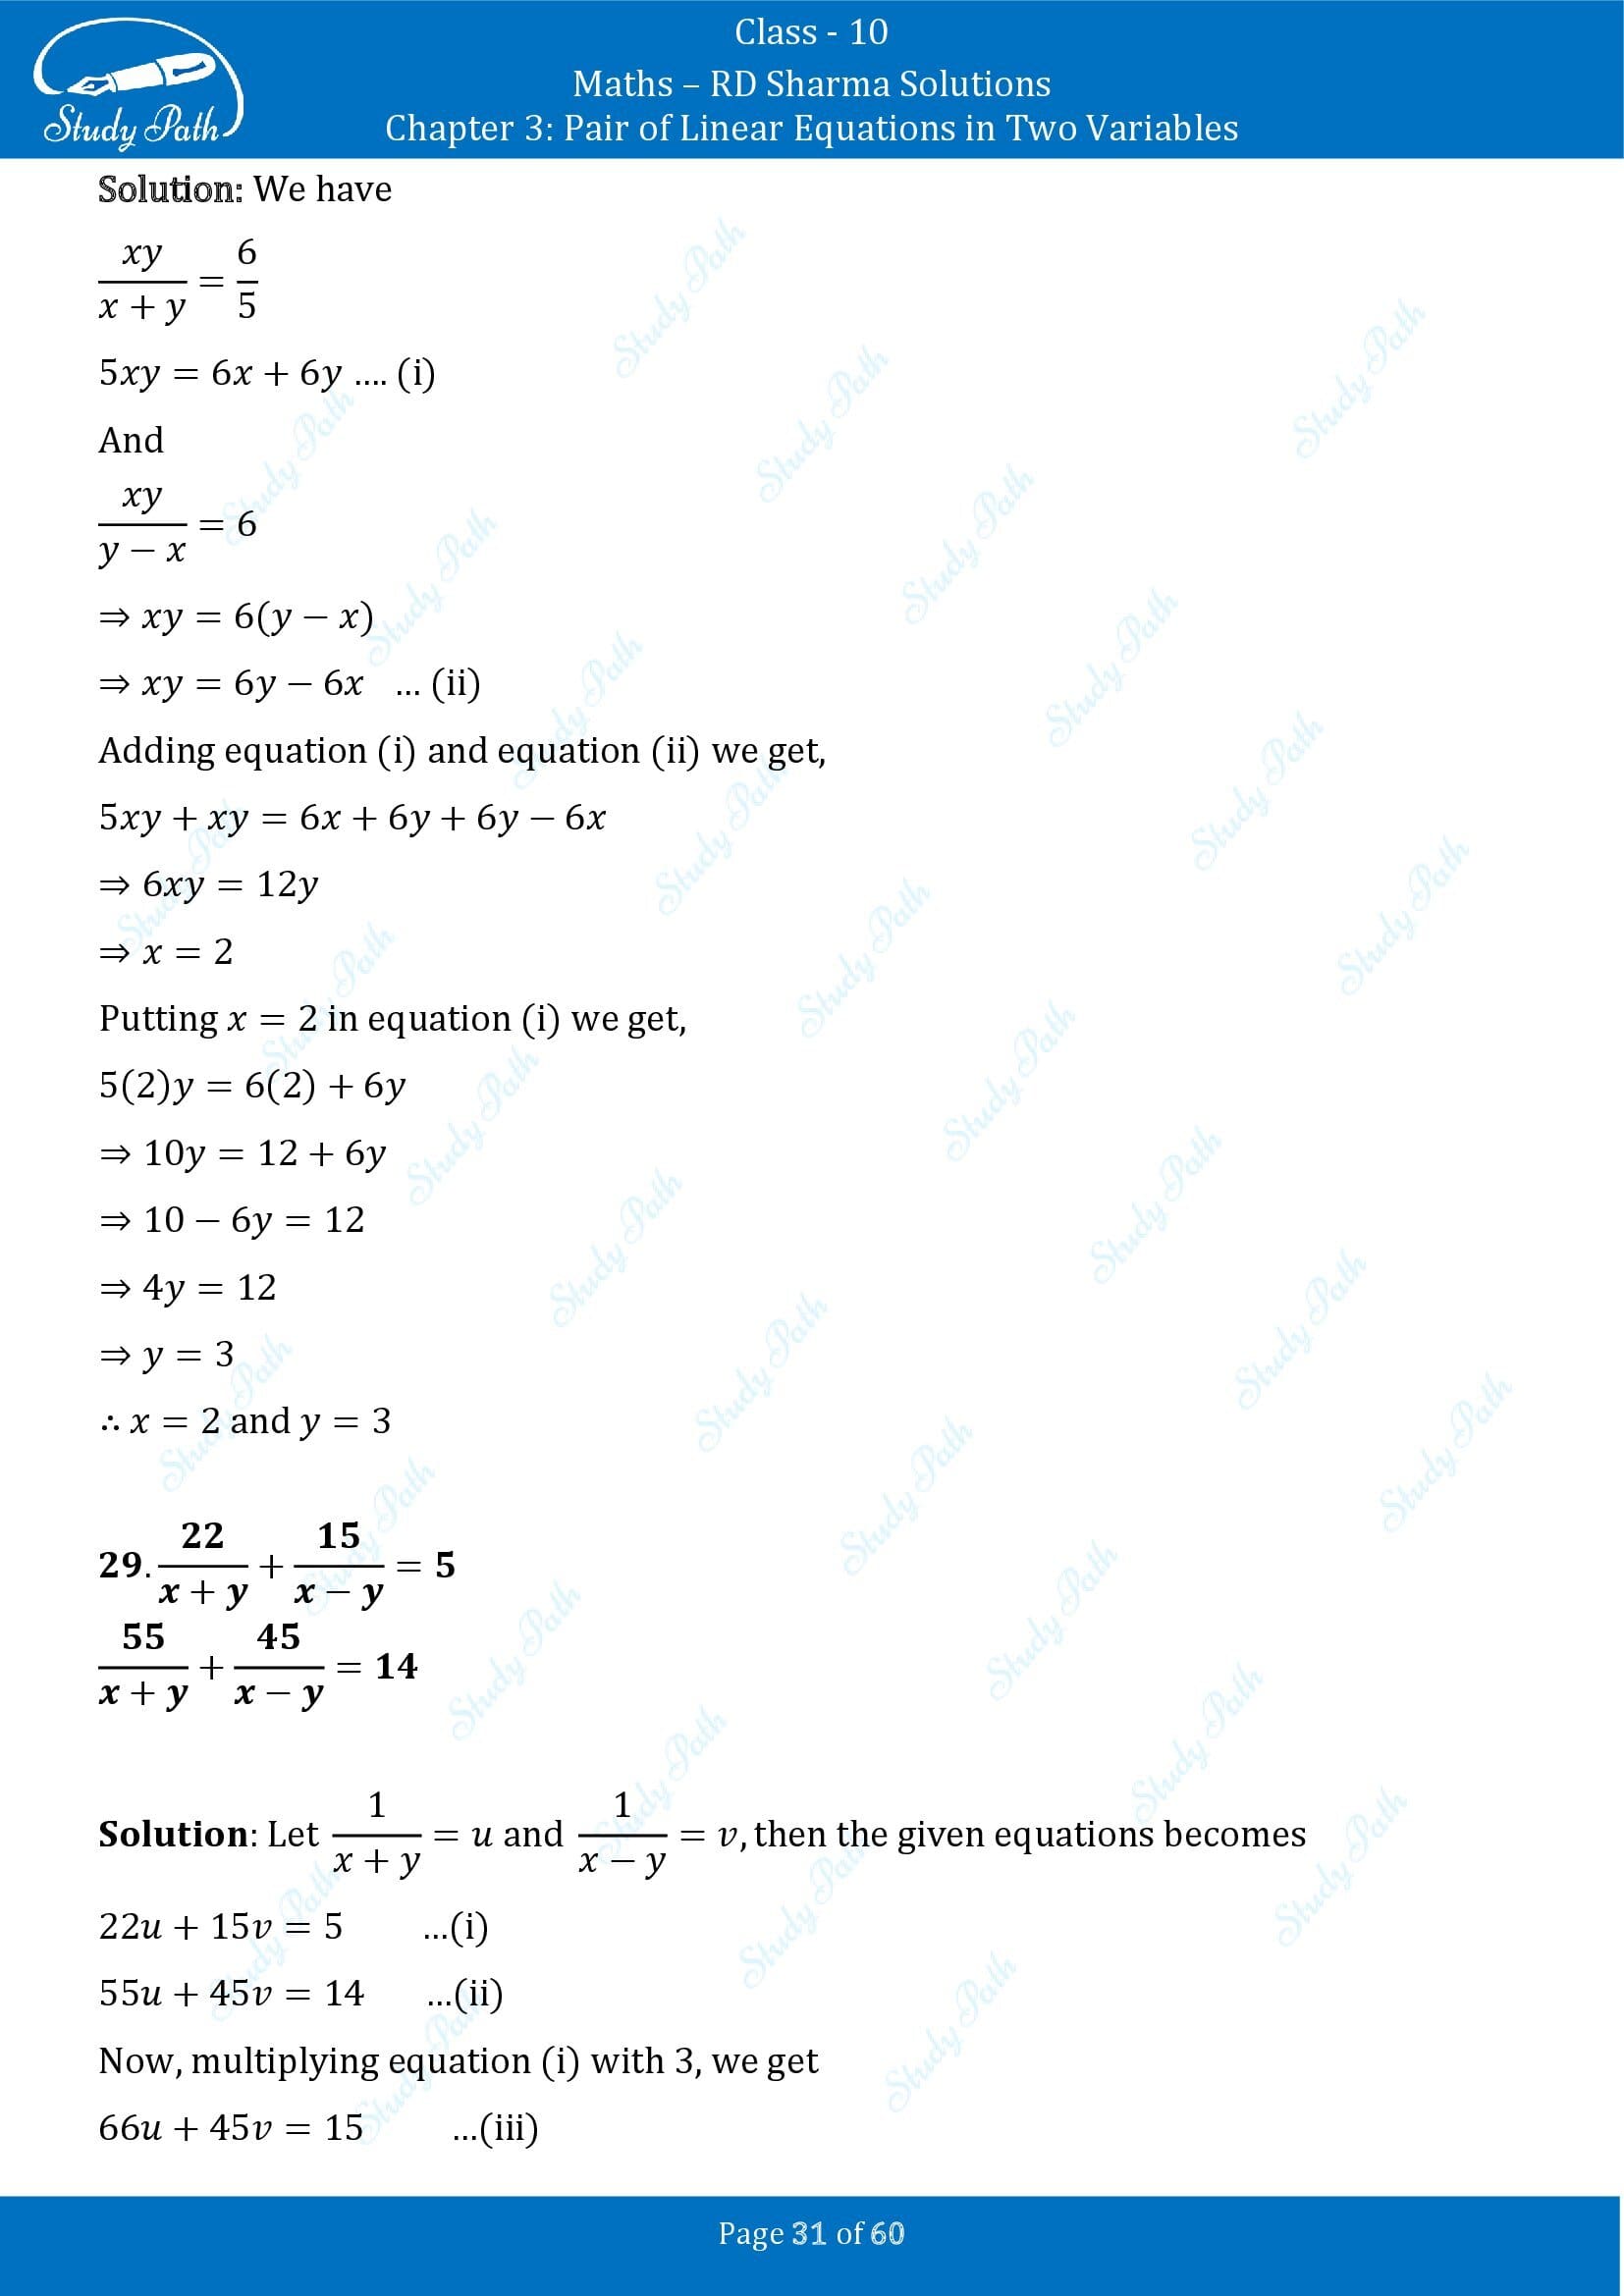 RD Sharma Solutions Class 10 Chapter 3 Pair of Linear Equations in Two Variables Exercise 3.3 00031